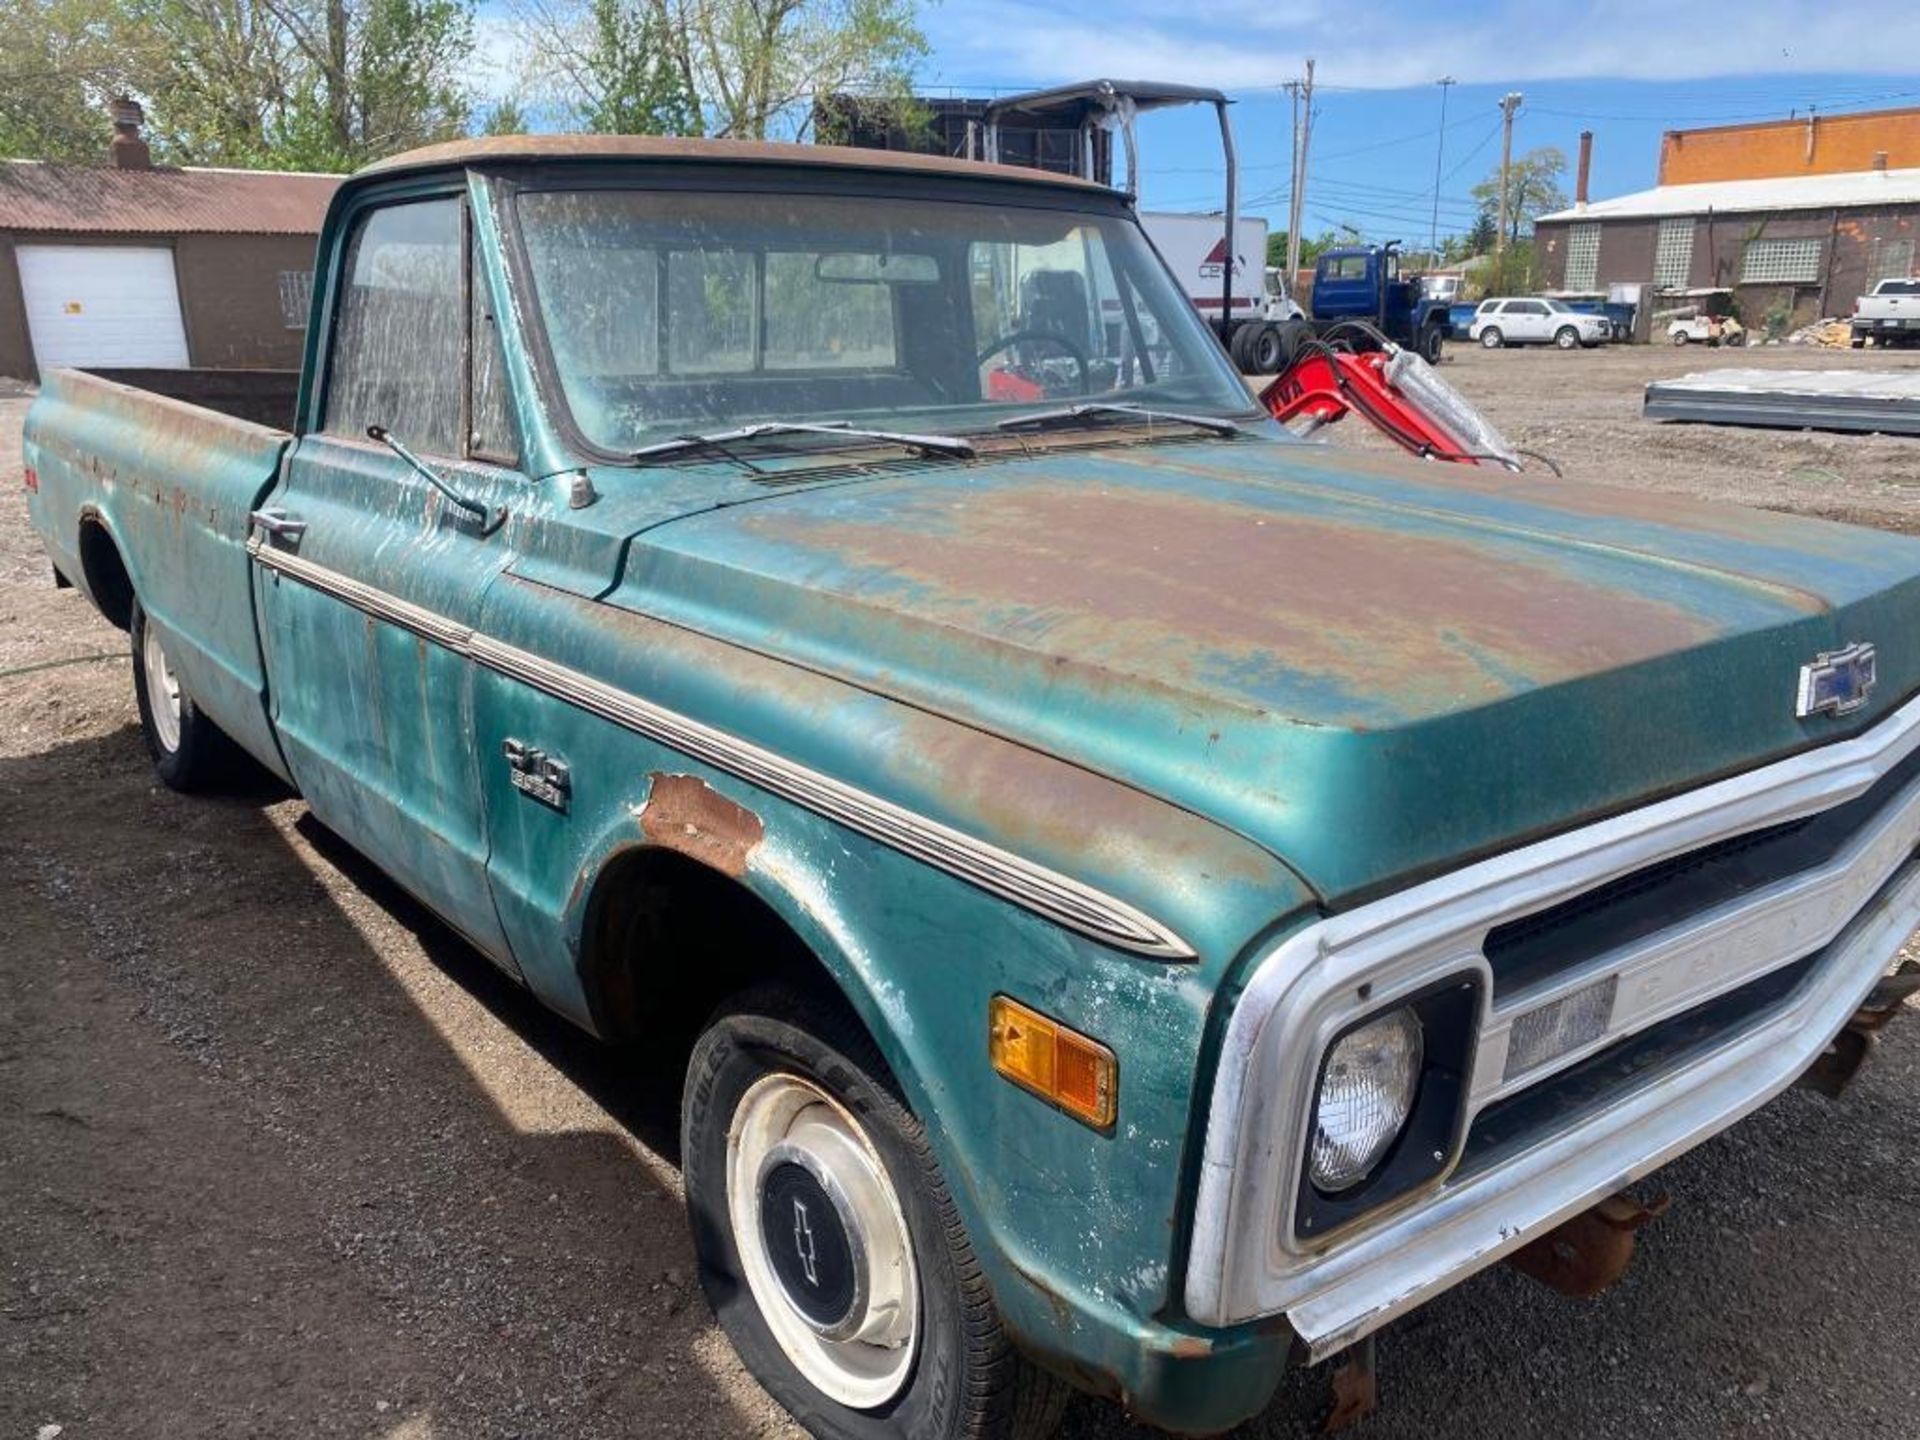 1970 C/10 Pickup Truck (for parts) - Image 3 of 10